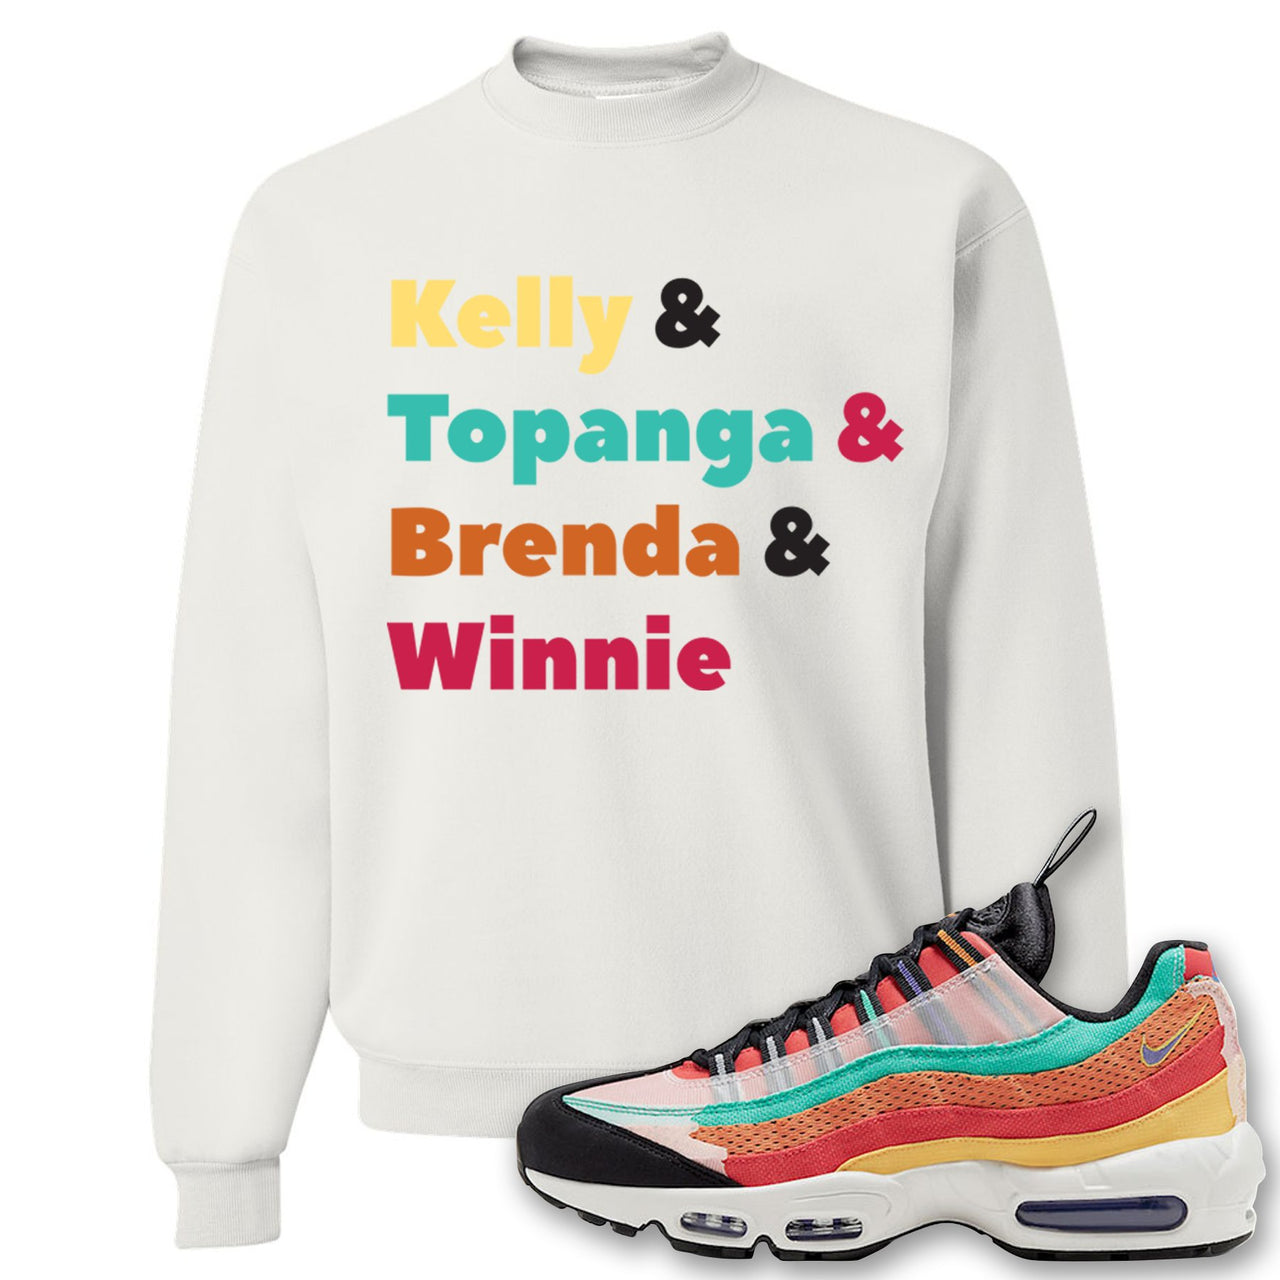 Air Max 95 Black History Month Sneaker White Crewneck Sweatshirt | Crewneck to match Nike Air Max 95 Black History Month Shoes | Kelly And Gang